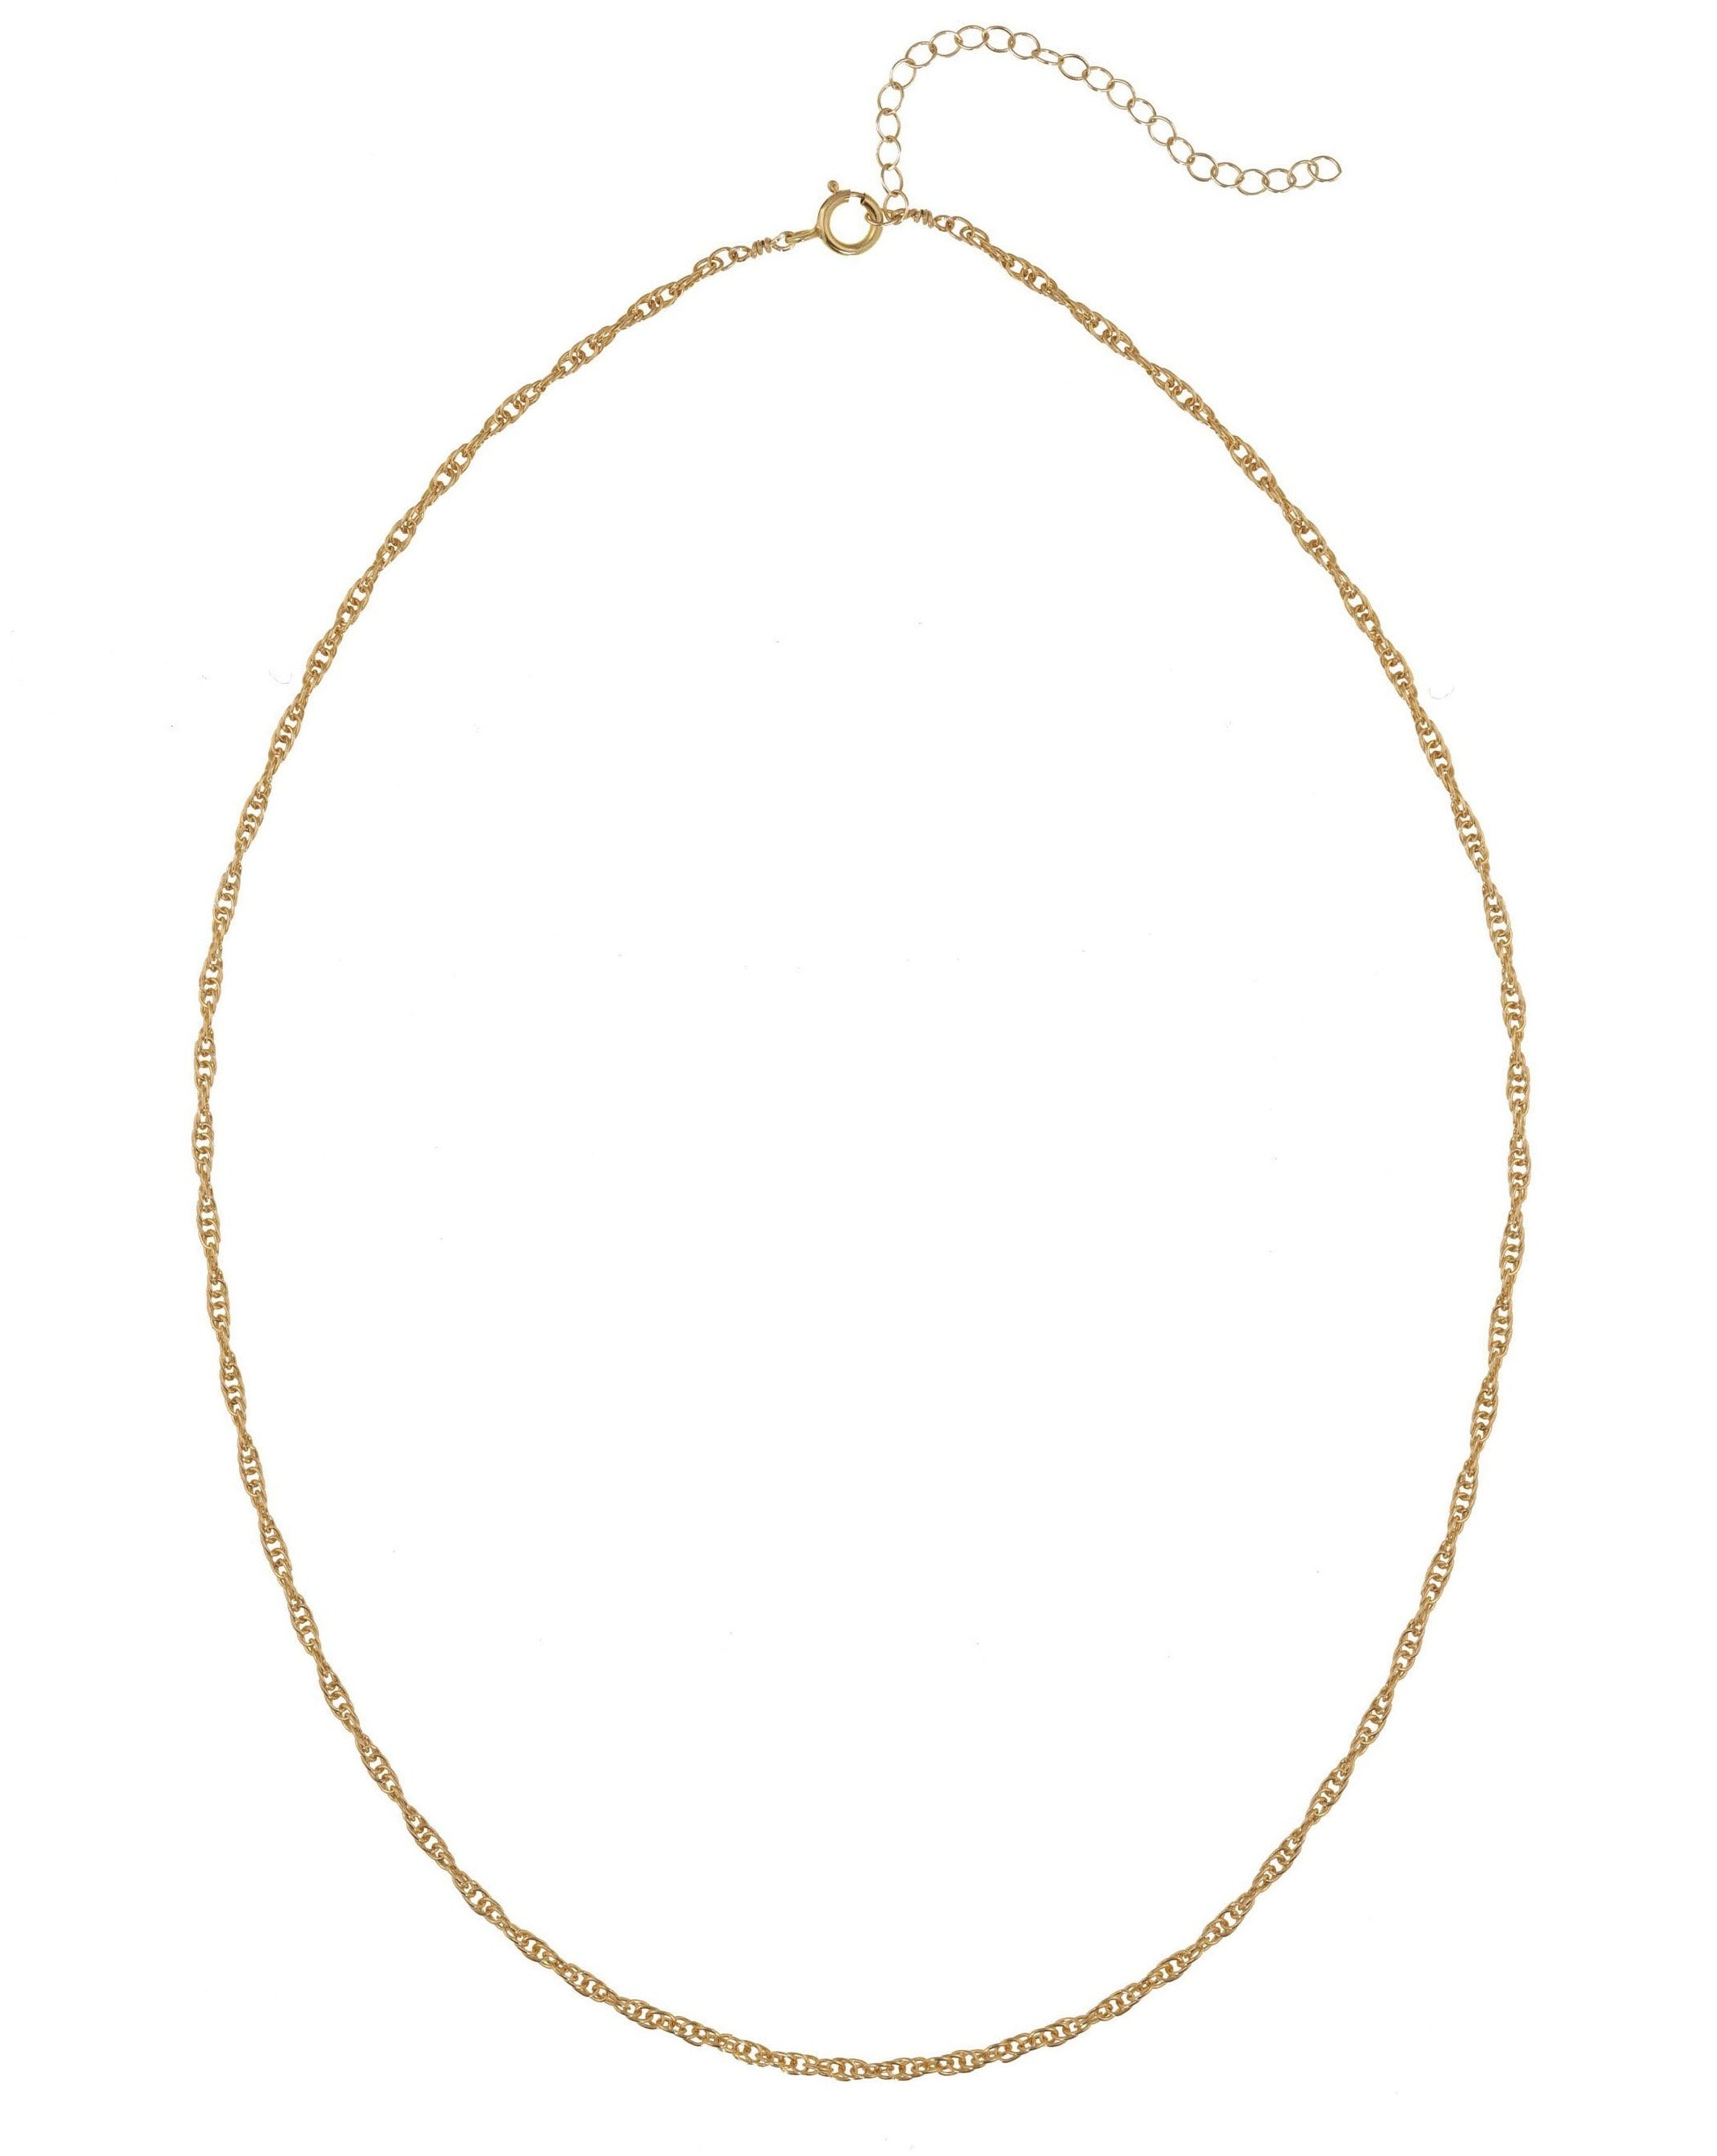 Kali Necklace by KOZAKH. A 14 inch long, 2mm thick twisted rope chain necklace, crafted in 14K Gold Filled.